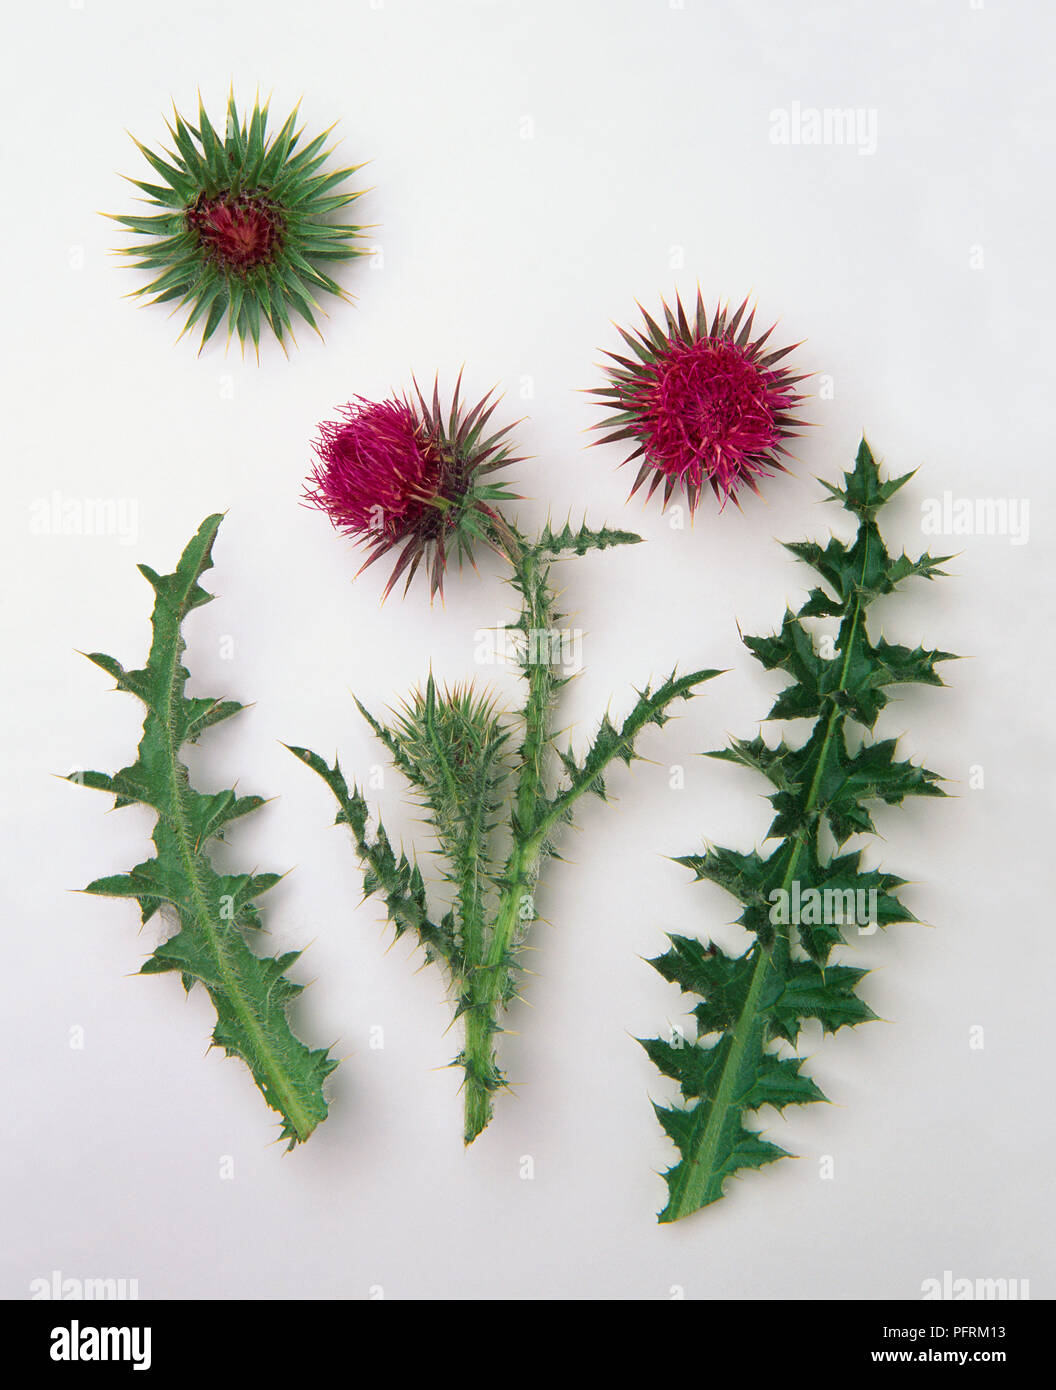 Carduus nutans (Musk thistle), leaves and deep pink flowers Stock Photo